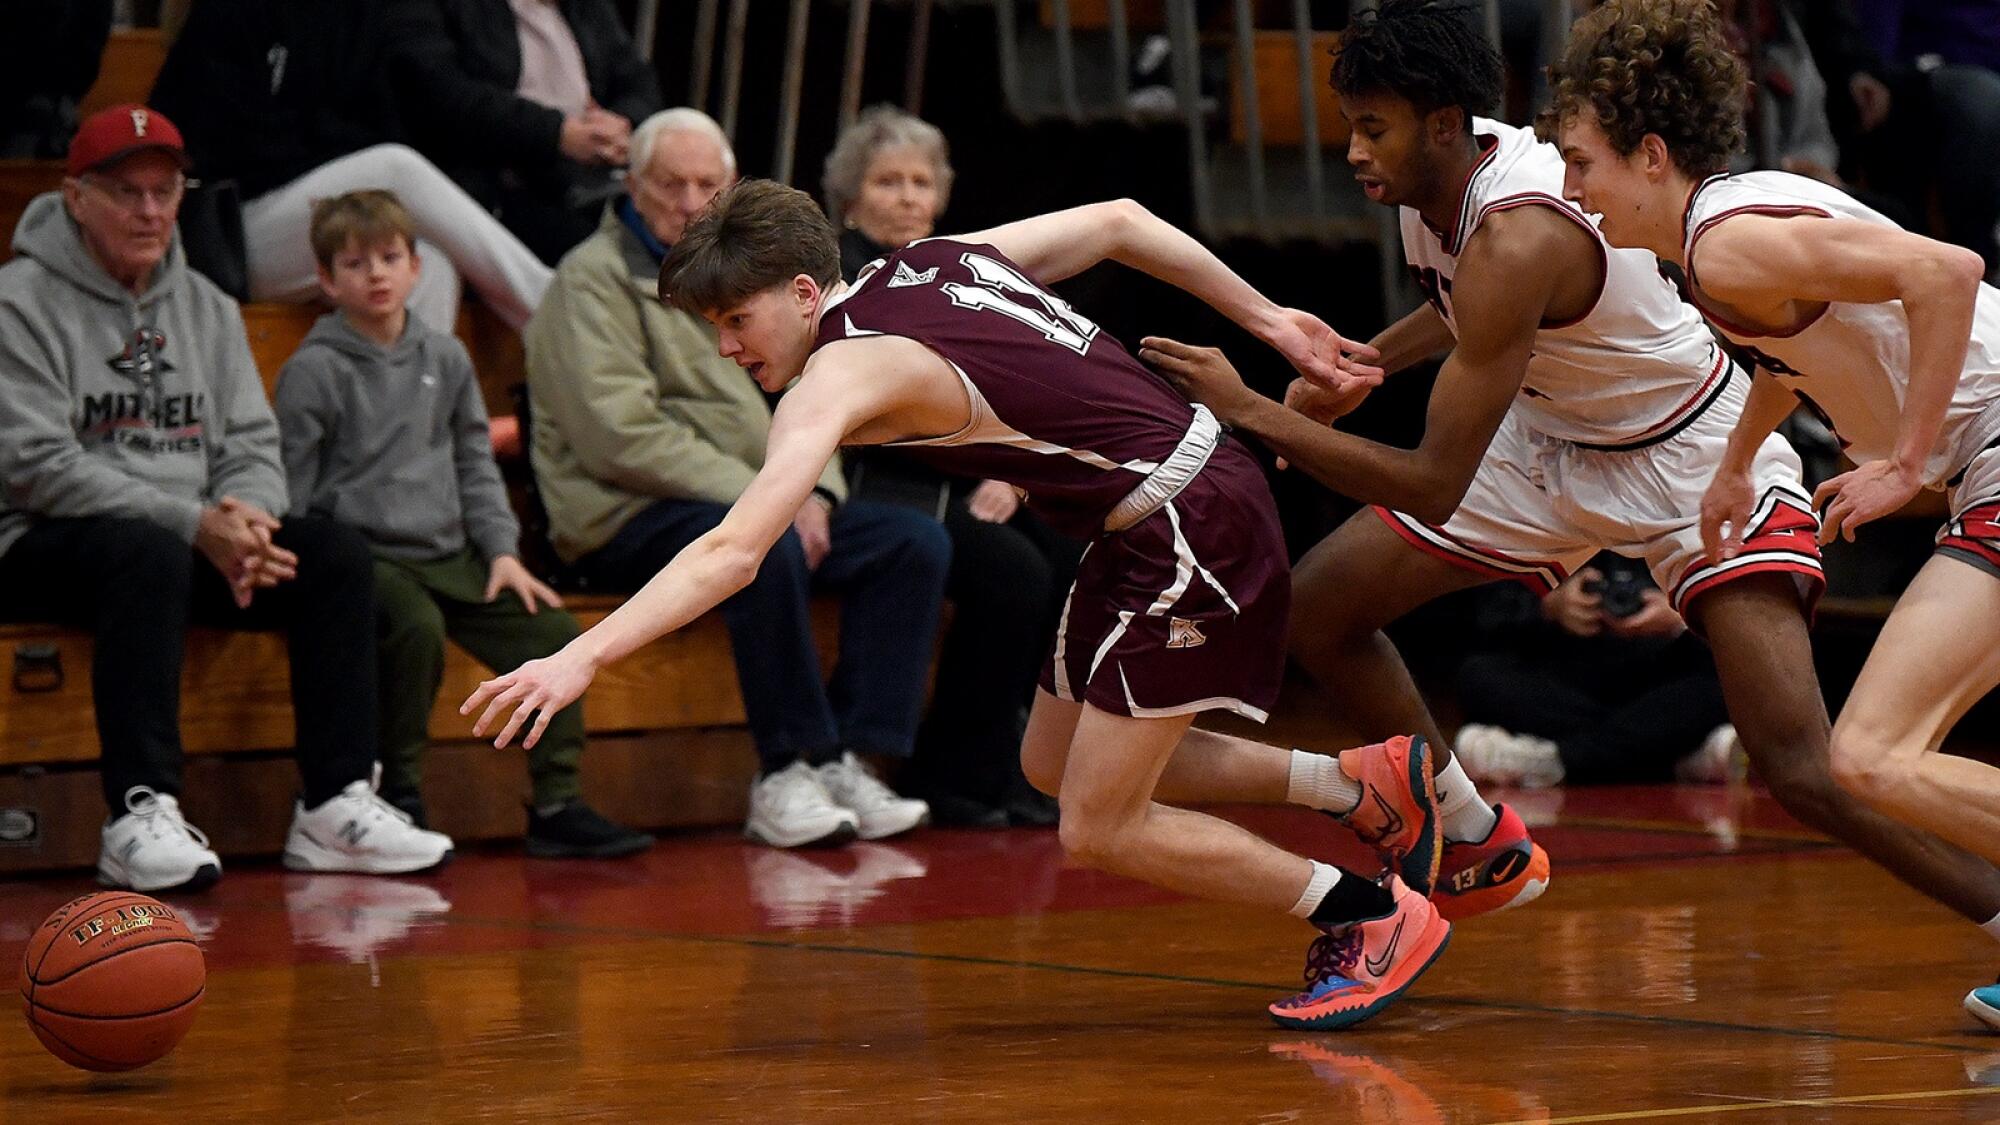 Fitch boys basketball forces win over Killingly